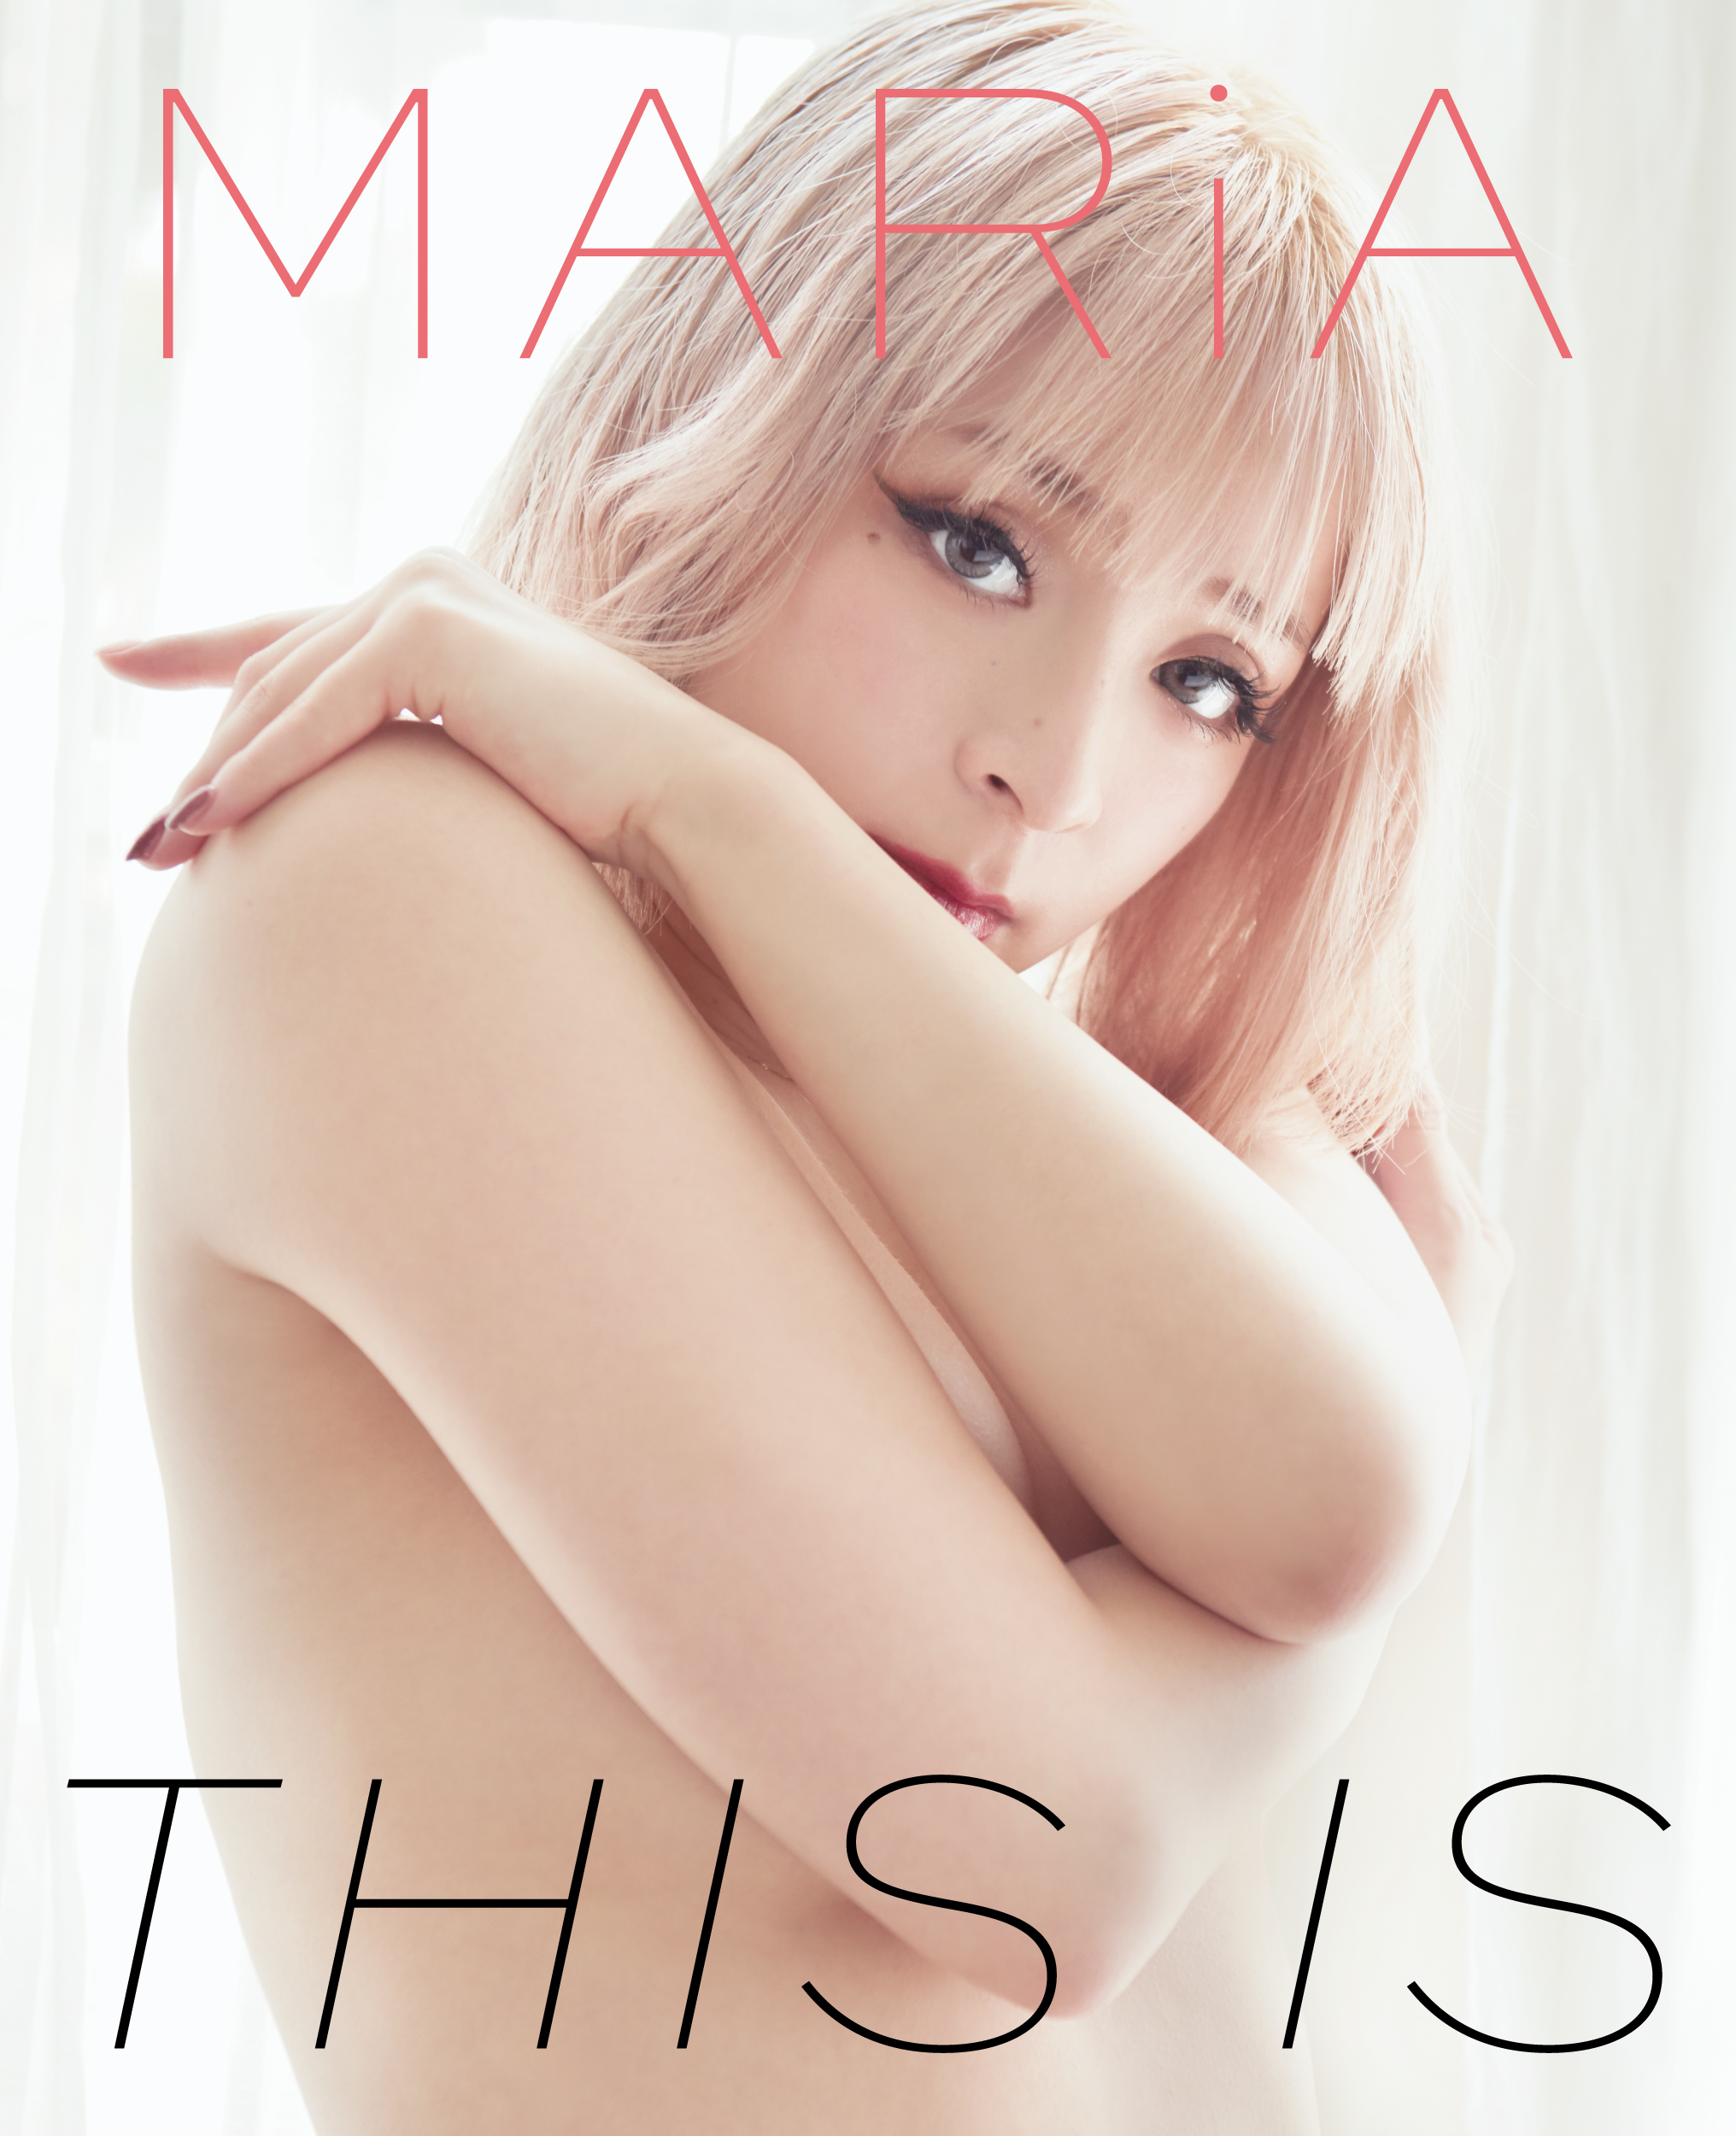 【Ponycanyon Online Limited Version】 MARiA Photobook+Blu-ray “THIS IS” Release on Aug 6th,2021 No.1